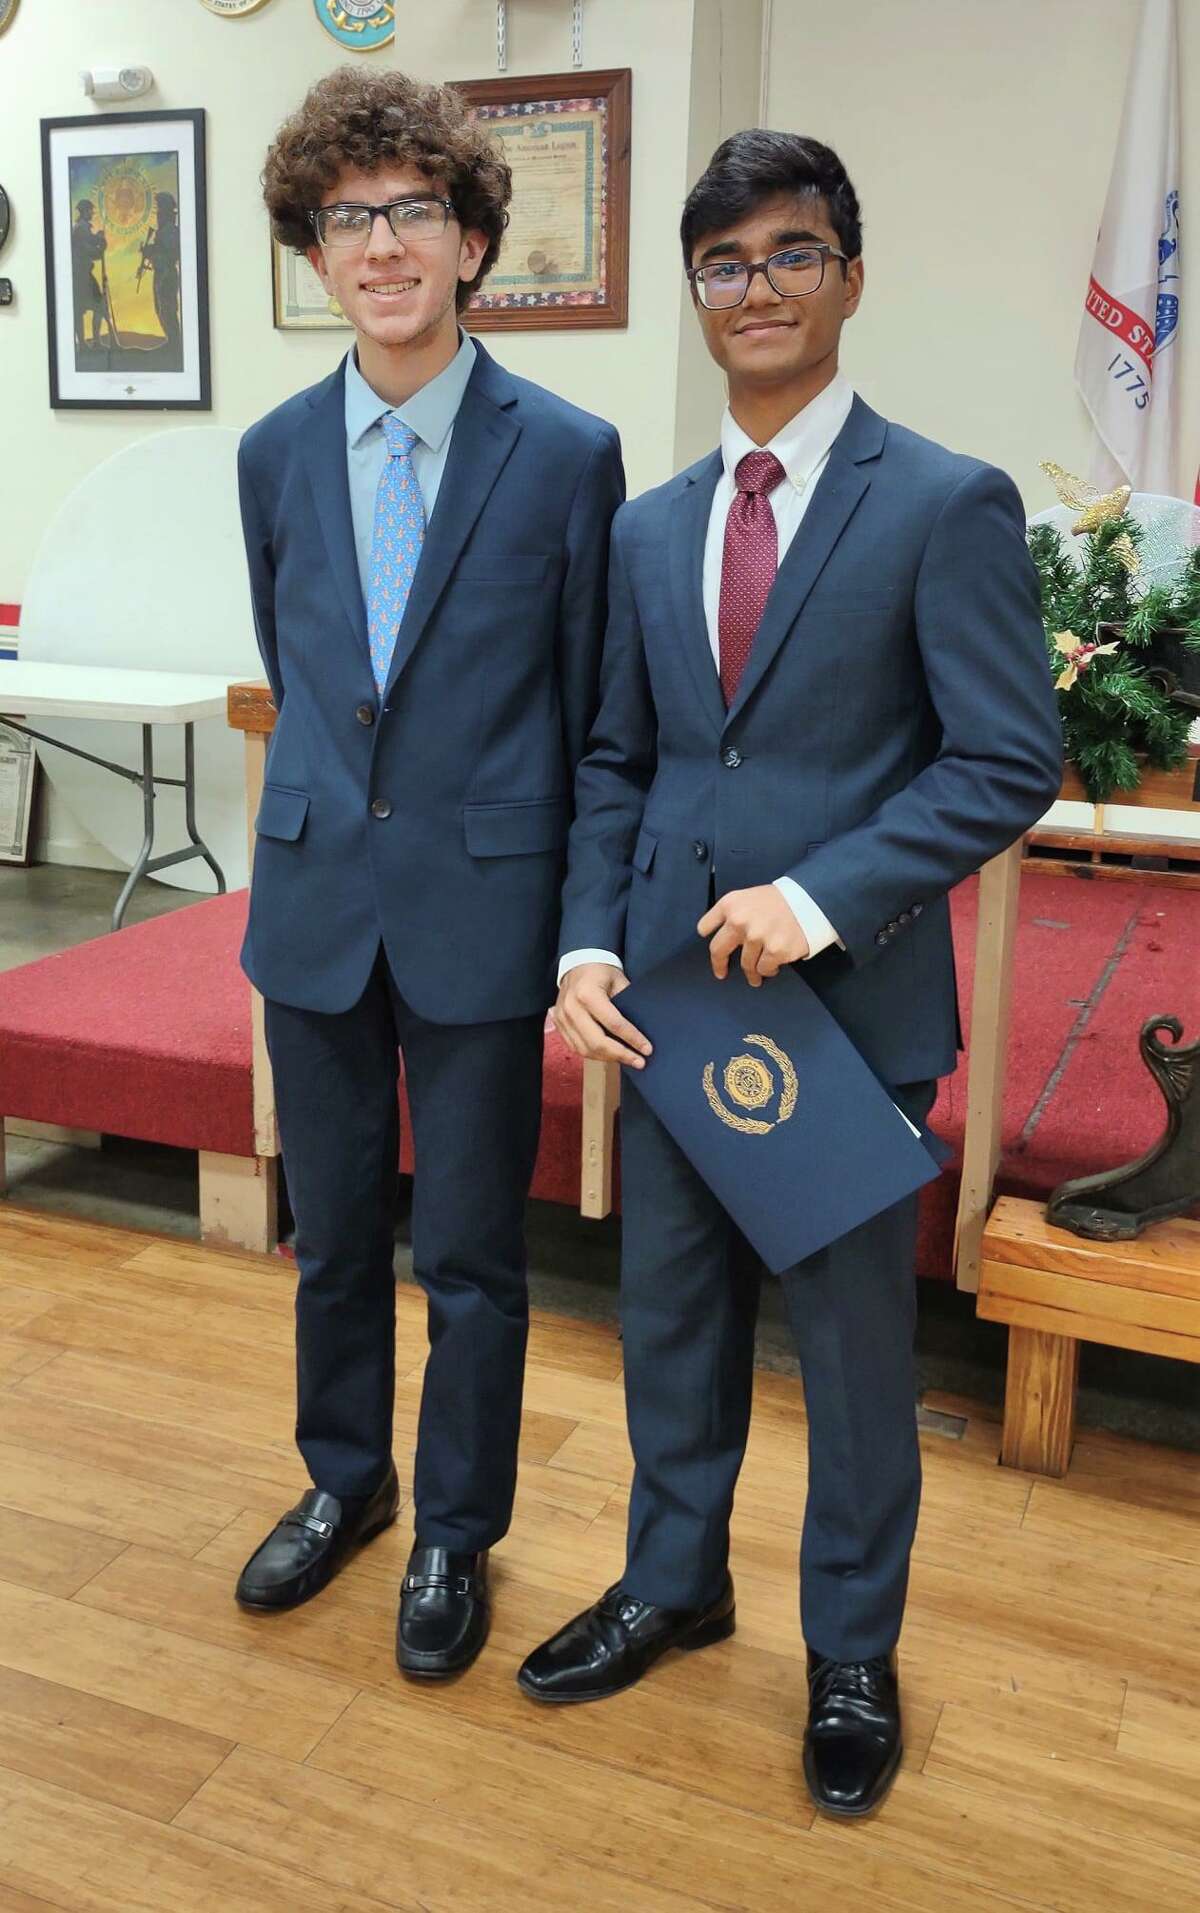 Pictured from left are Tyler Crivella from Seven Lakes High School and Daniel Rupawalla from Obra D. Tompkins High School. Rupawalla was recented named the winner of the 22nd District Department of Texas American Legion Oratorical contest.